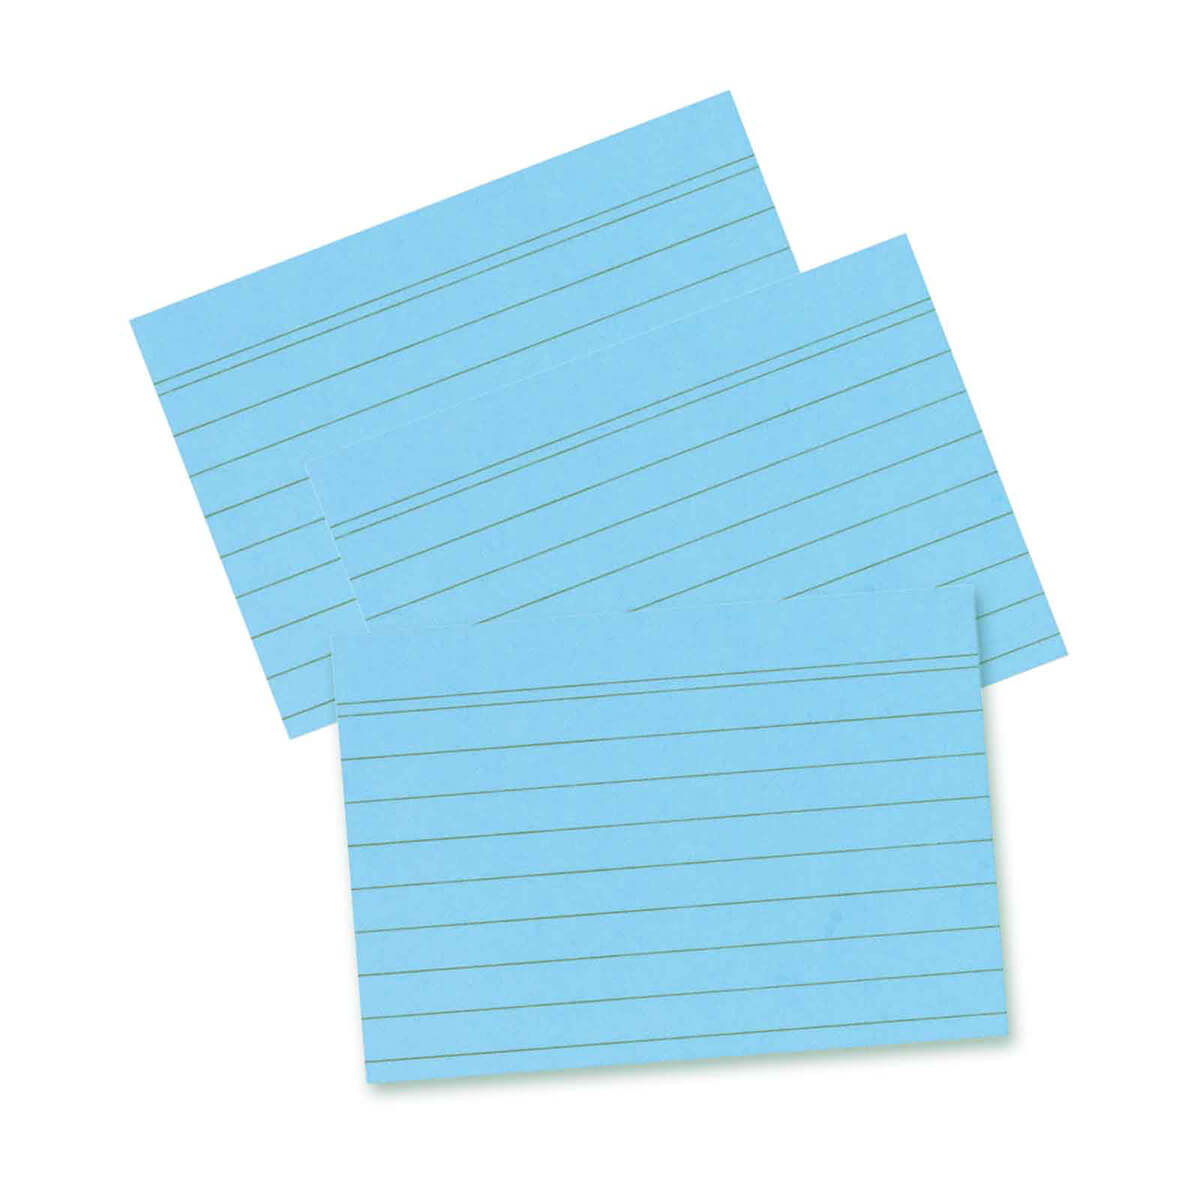 Herlitz Index cards lined 100 pieces shrink-wrapped a5 Blue